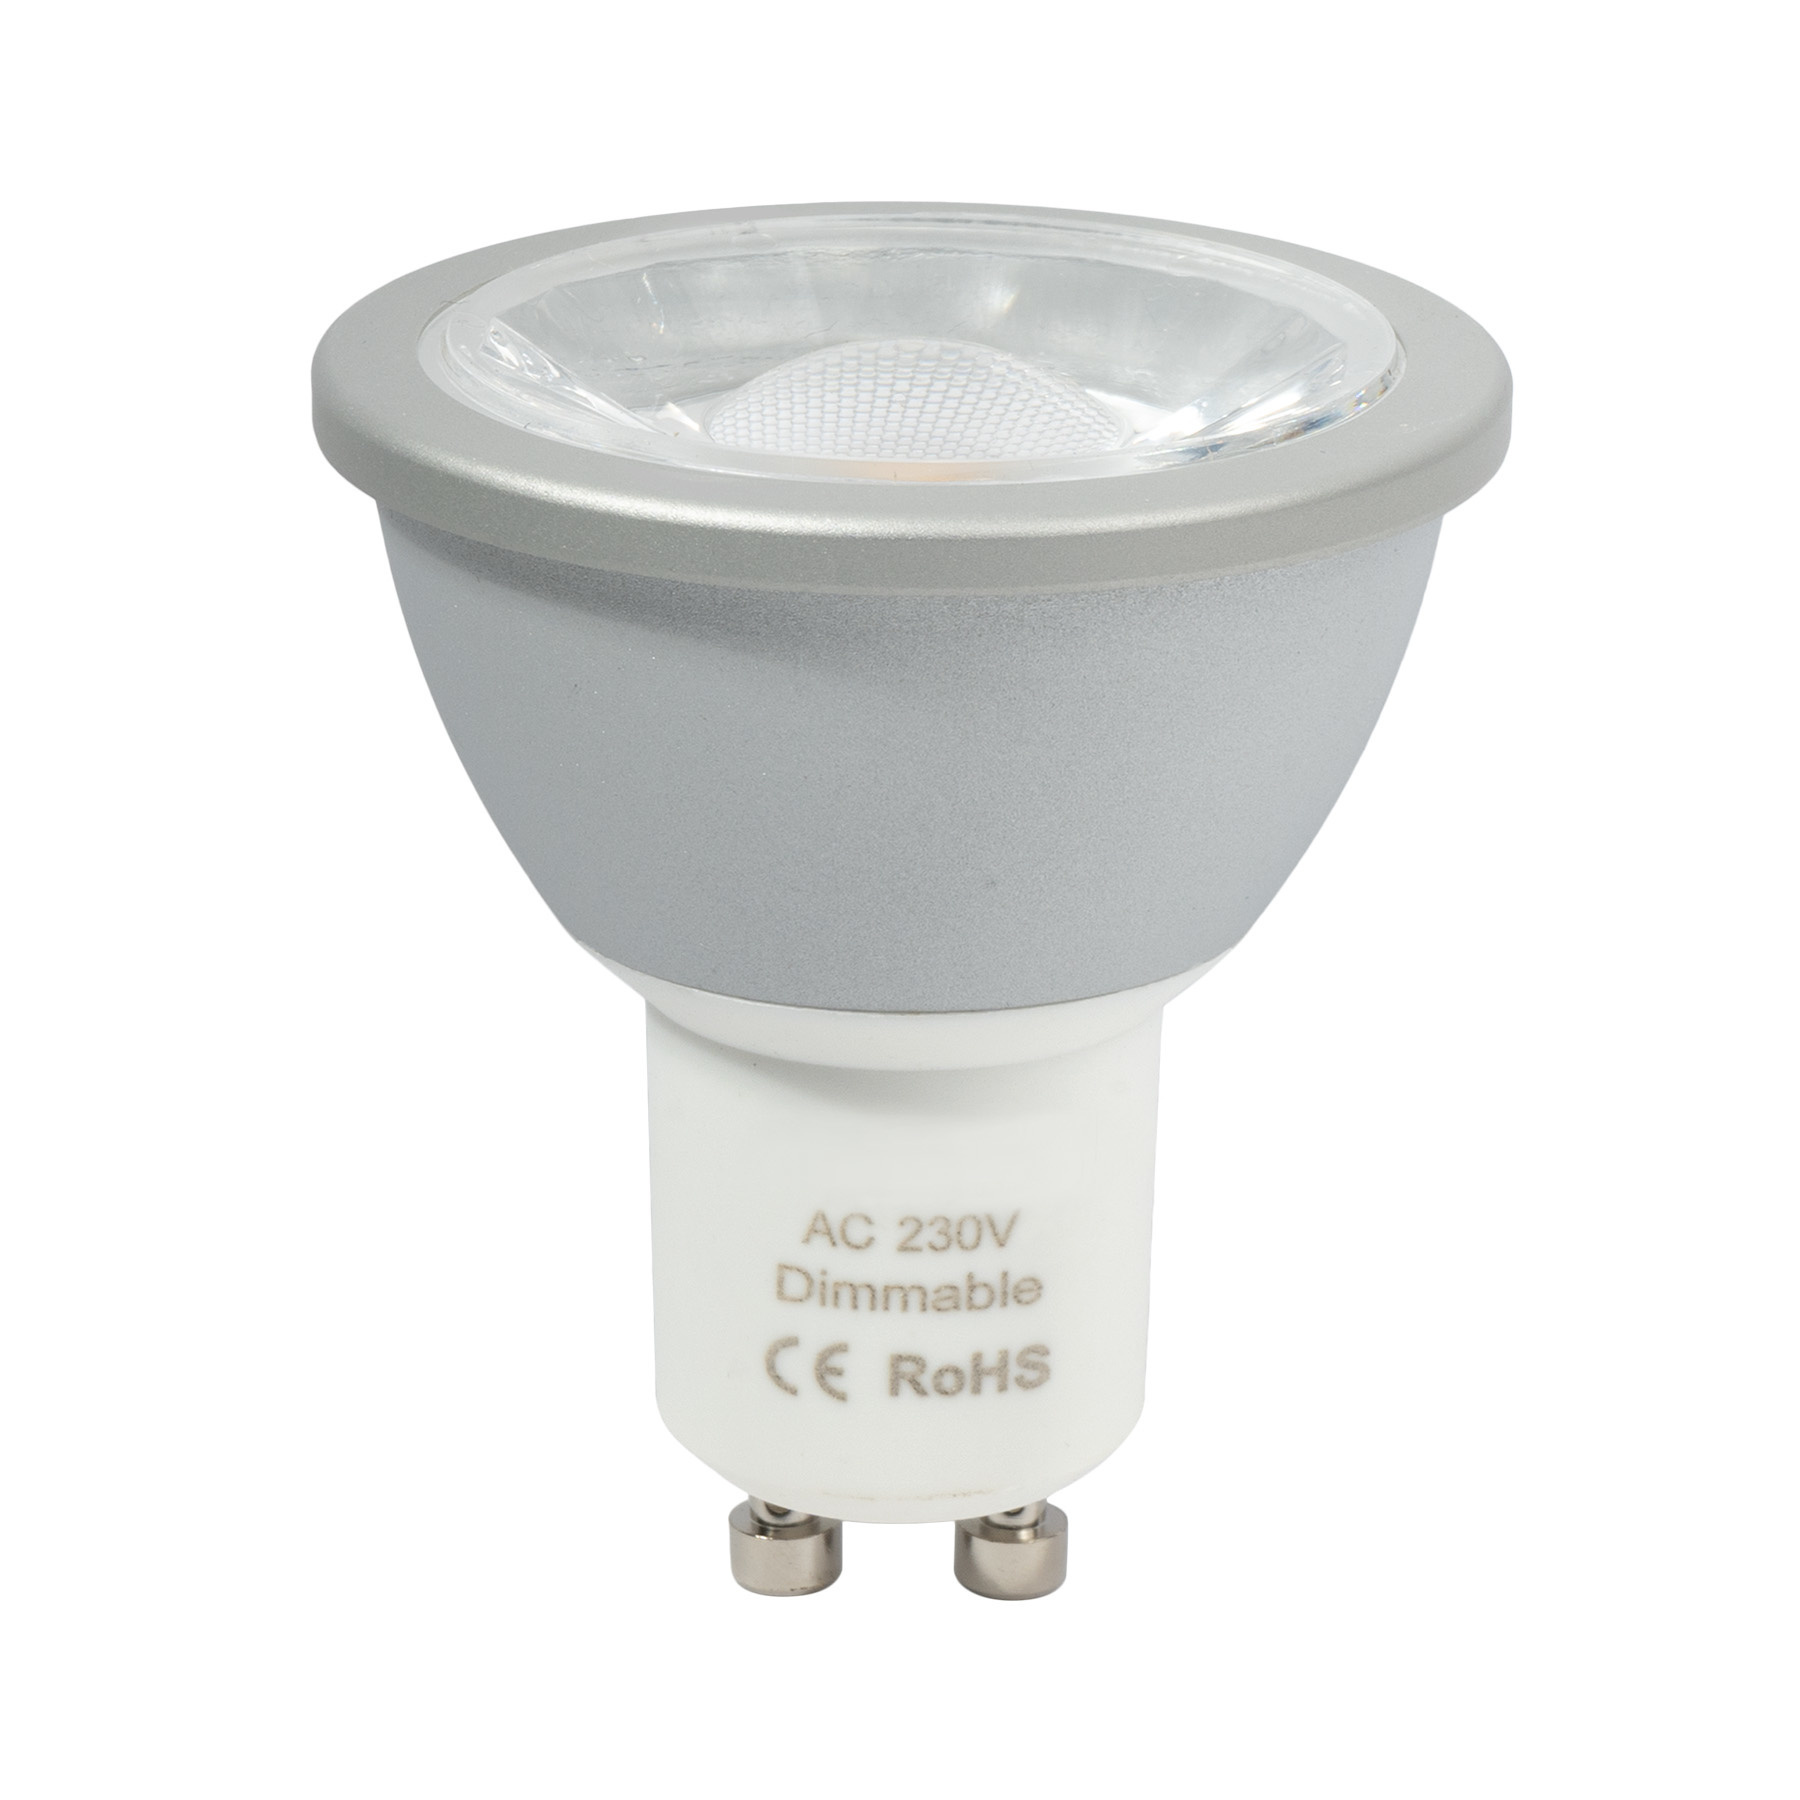 Ampoule LED GU10 5W 110° SMD 6000K - Blanc Froid - Pas Cher Optonica